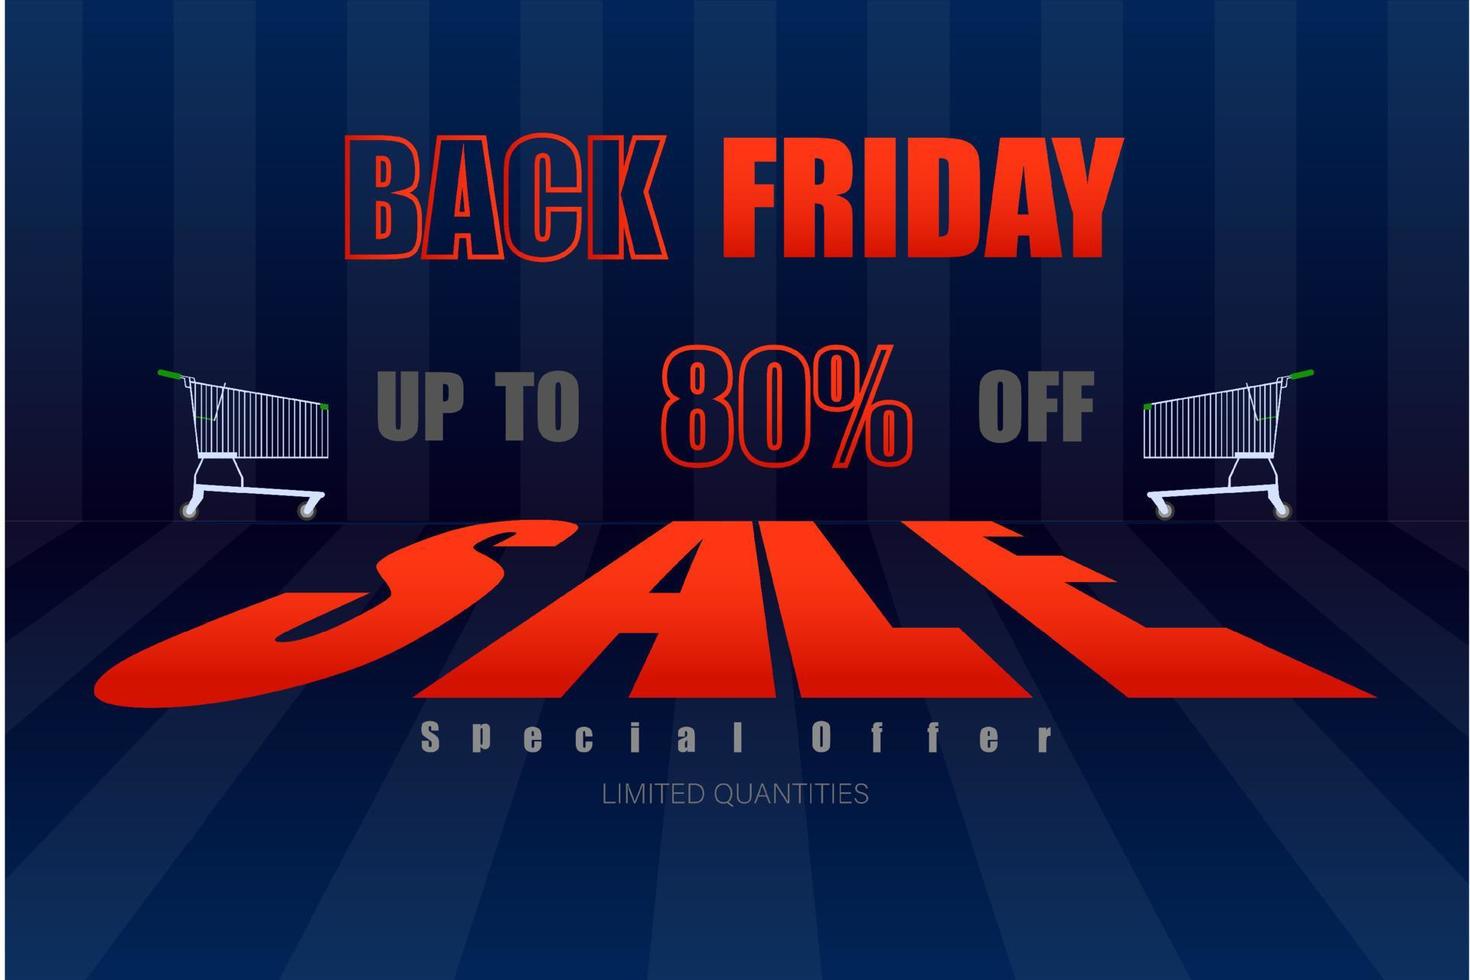 back friday up to 80 percent special offer dark blue tone vector illustration eps10